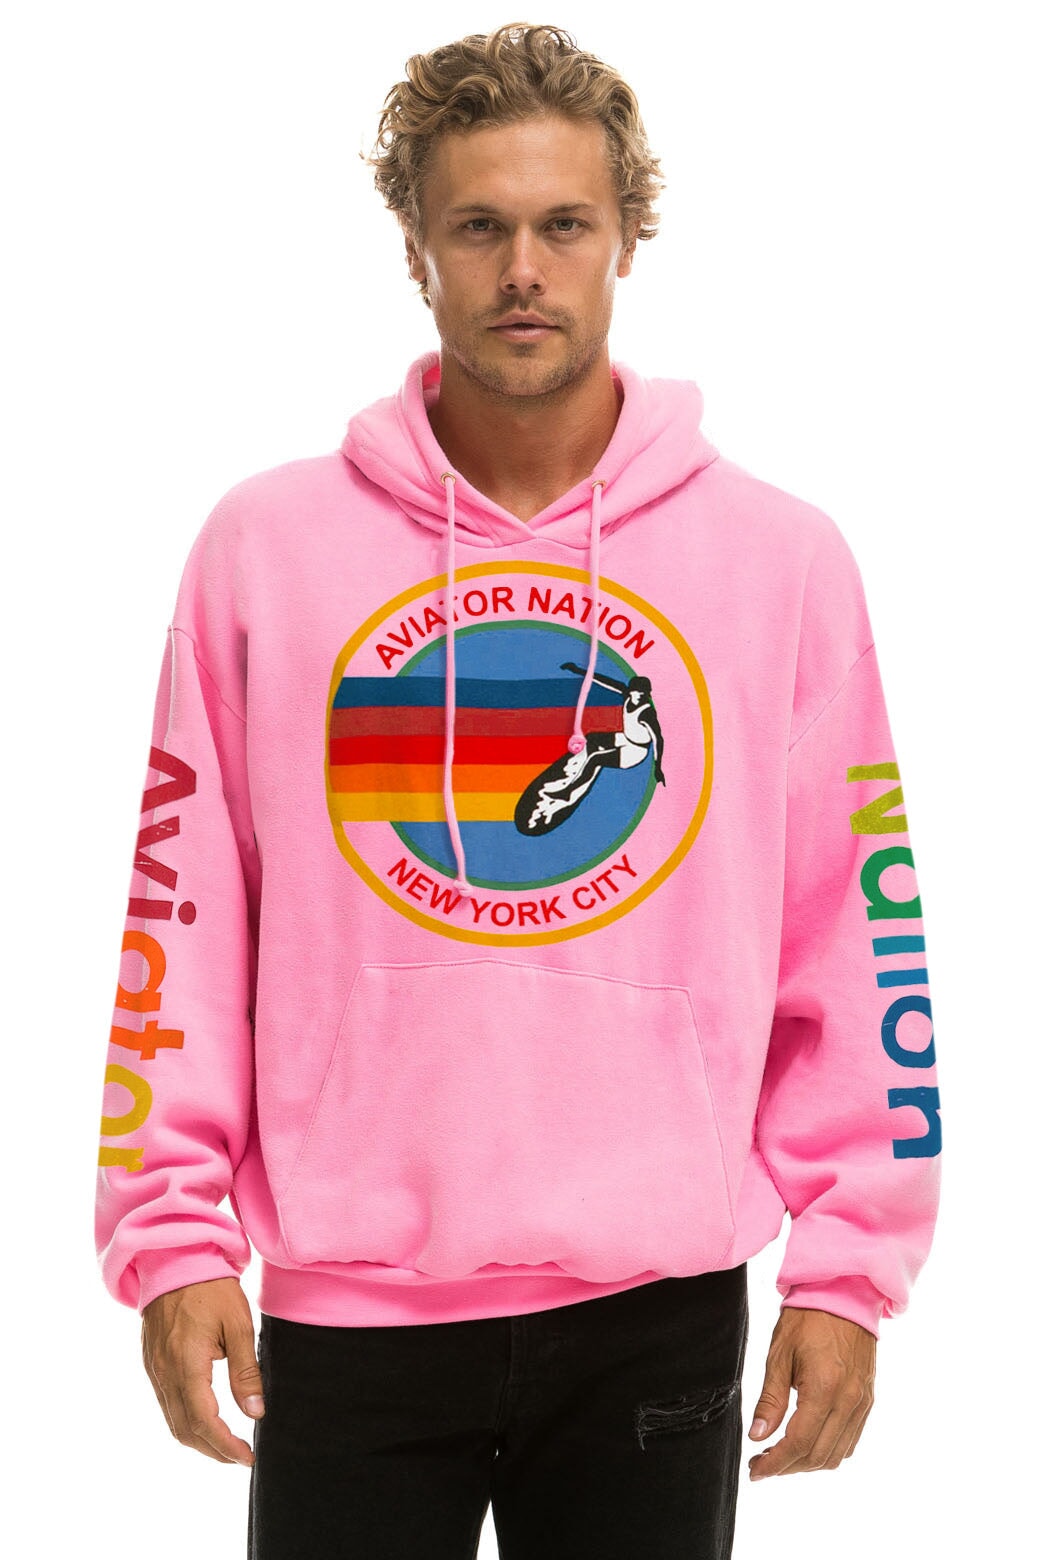 AVIATOR NATION NEW YORK CITY RELAXED PULLOVER HOODIE - NEON PINK Hoodie Aviator Nation 